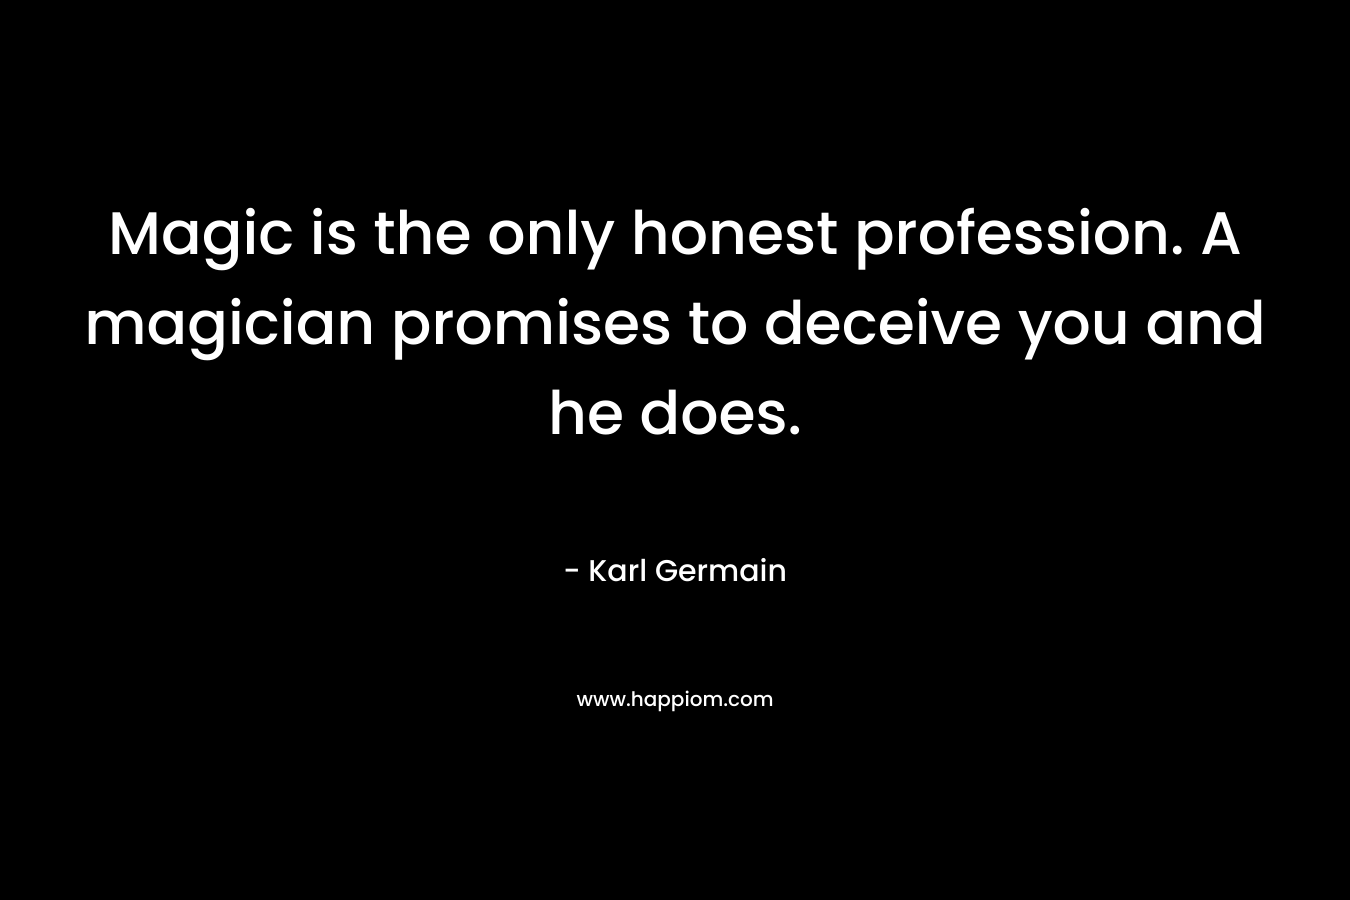 Magic is the only honest profession. A magician promises to deceive you and he does.